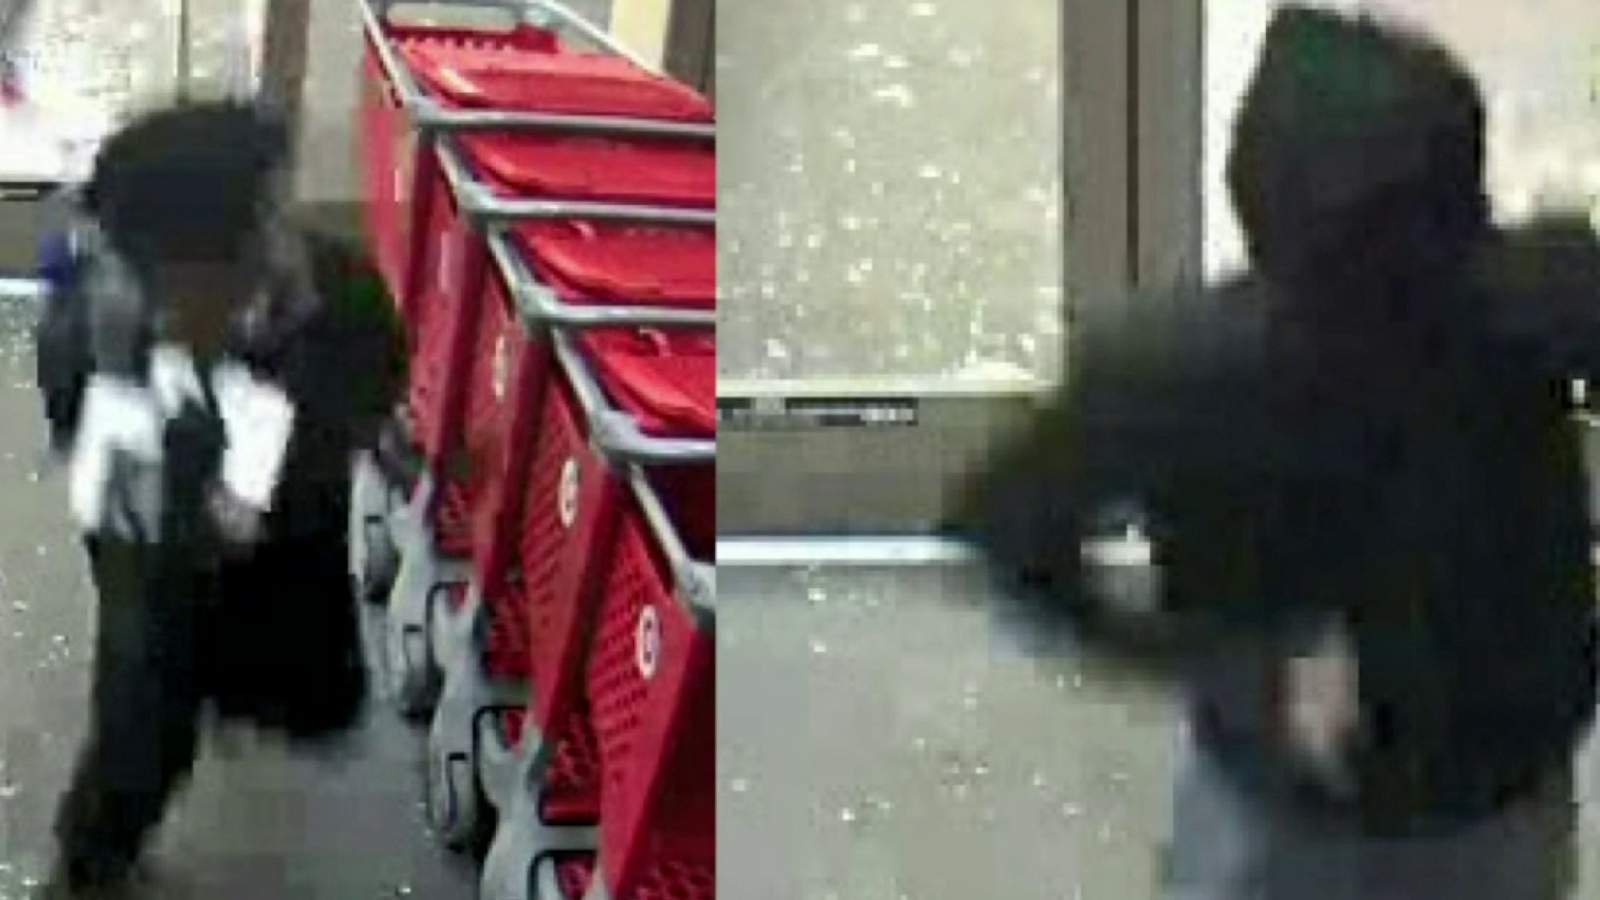 Thieves work quickly overnight to strike 3 Target stores in Metro Detroit